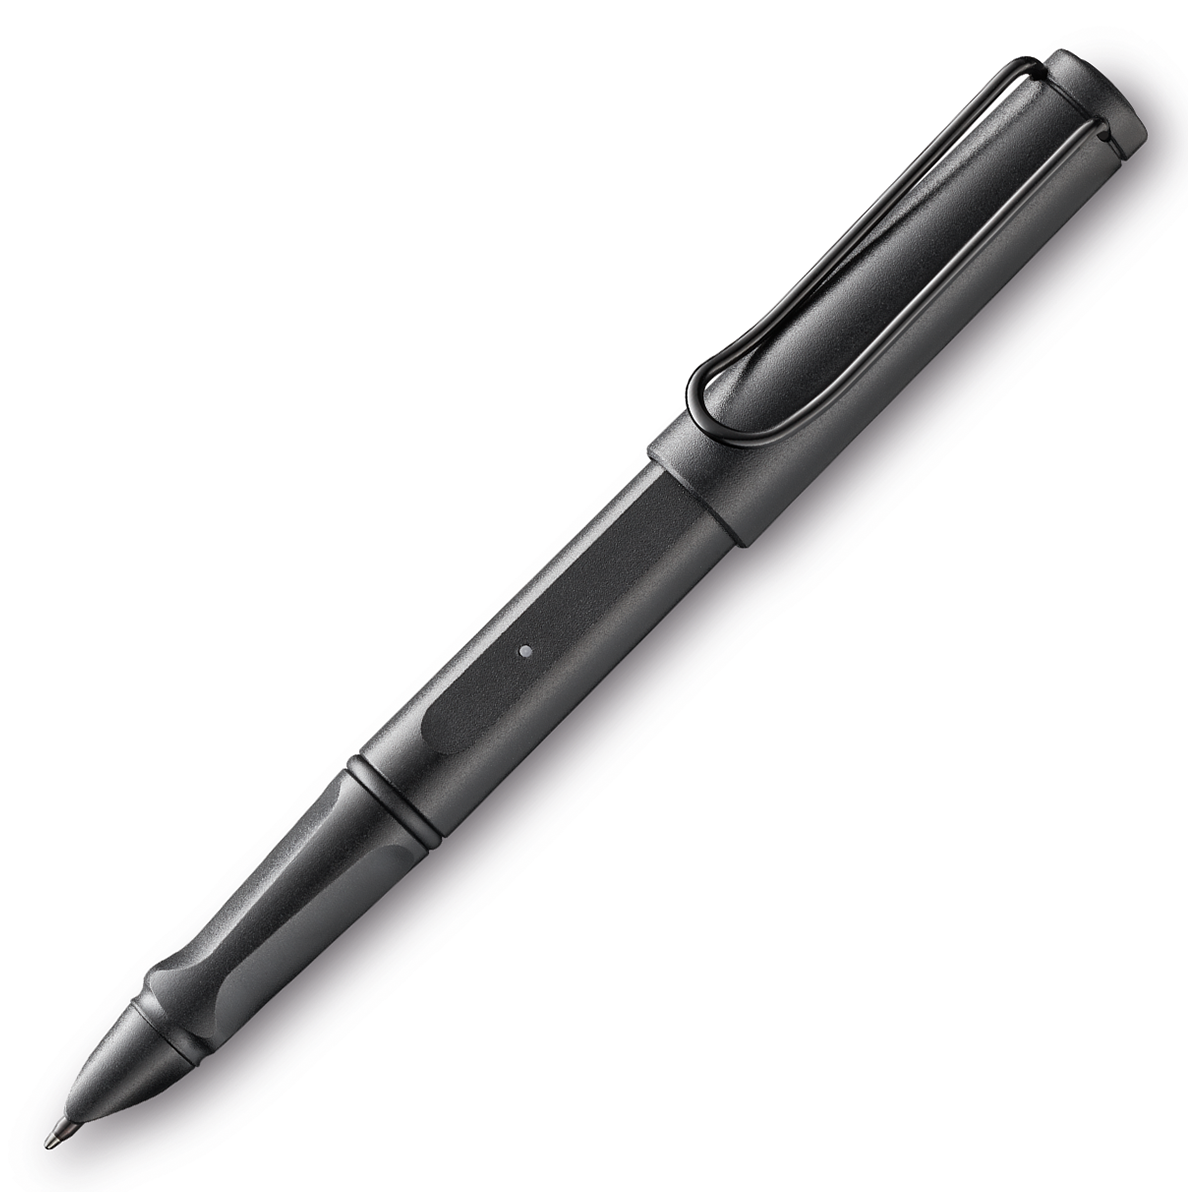 Ncode Digital Writing Set in the group Pens / Fine Writing / Gift Pens at Pen Store (128122)